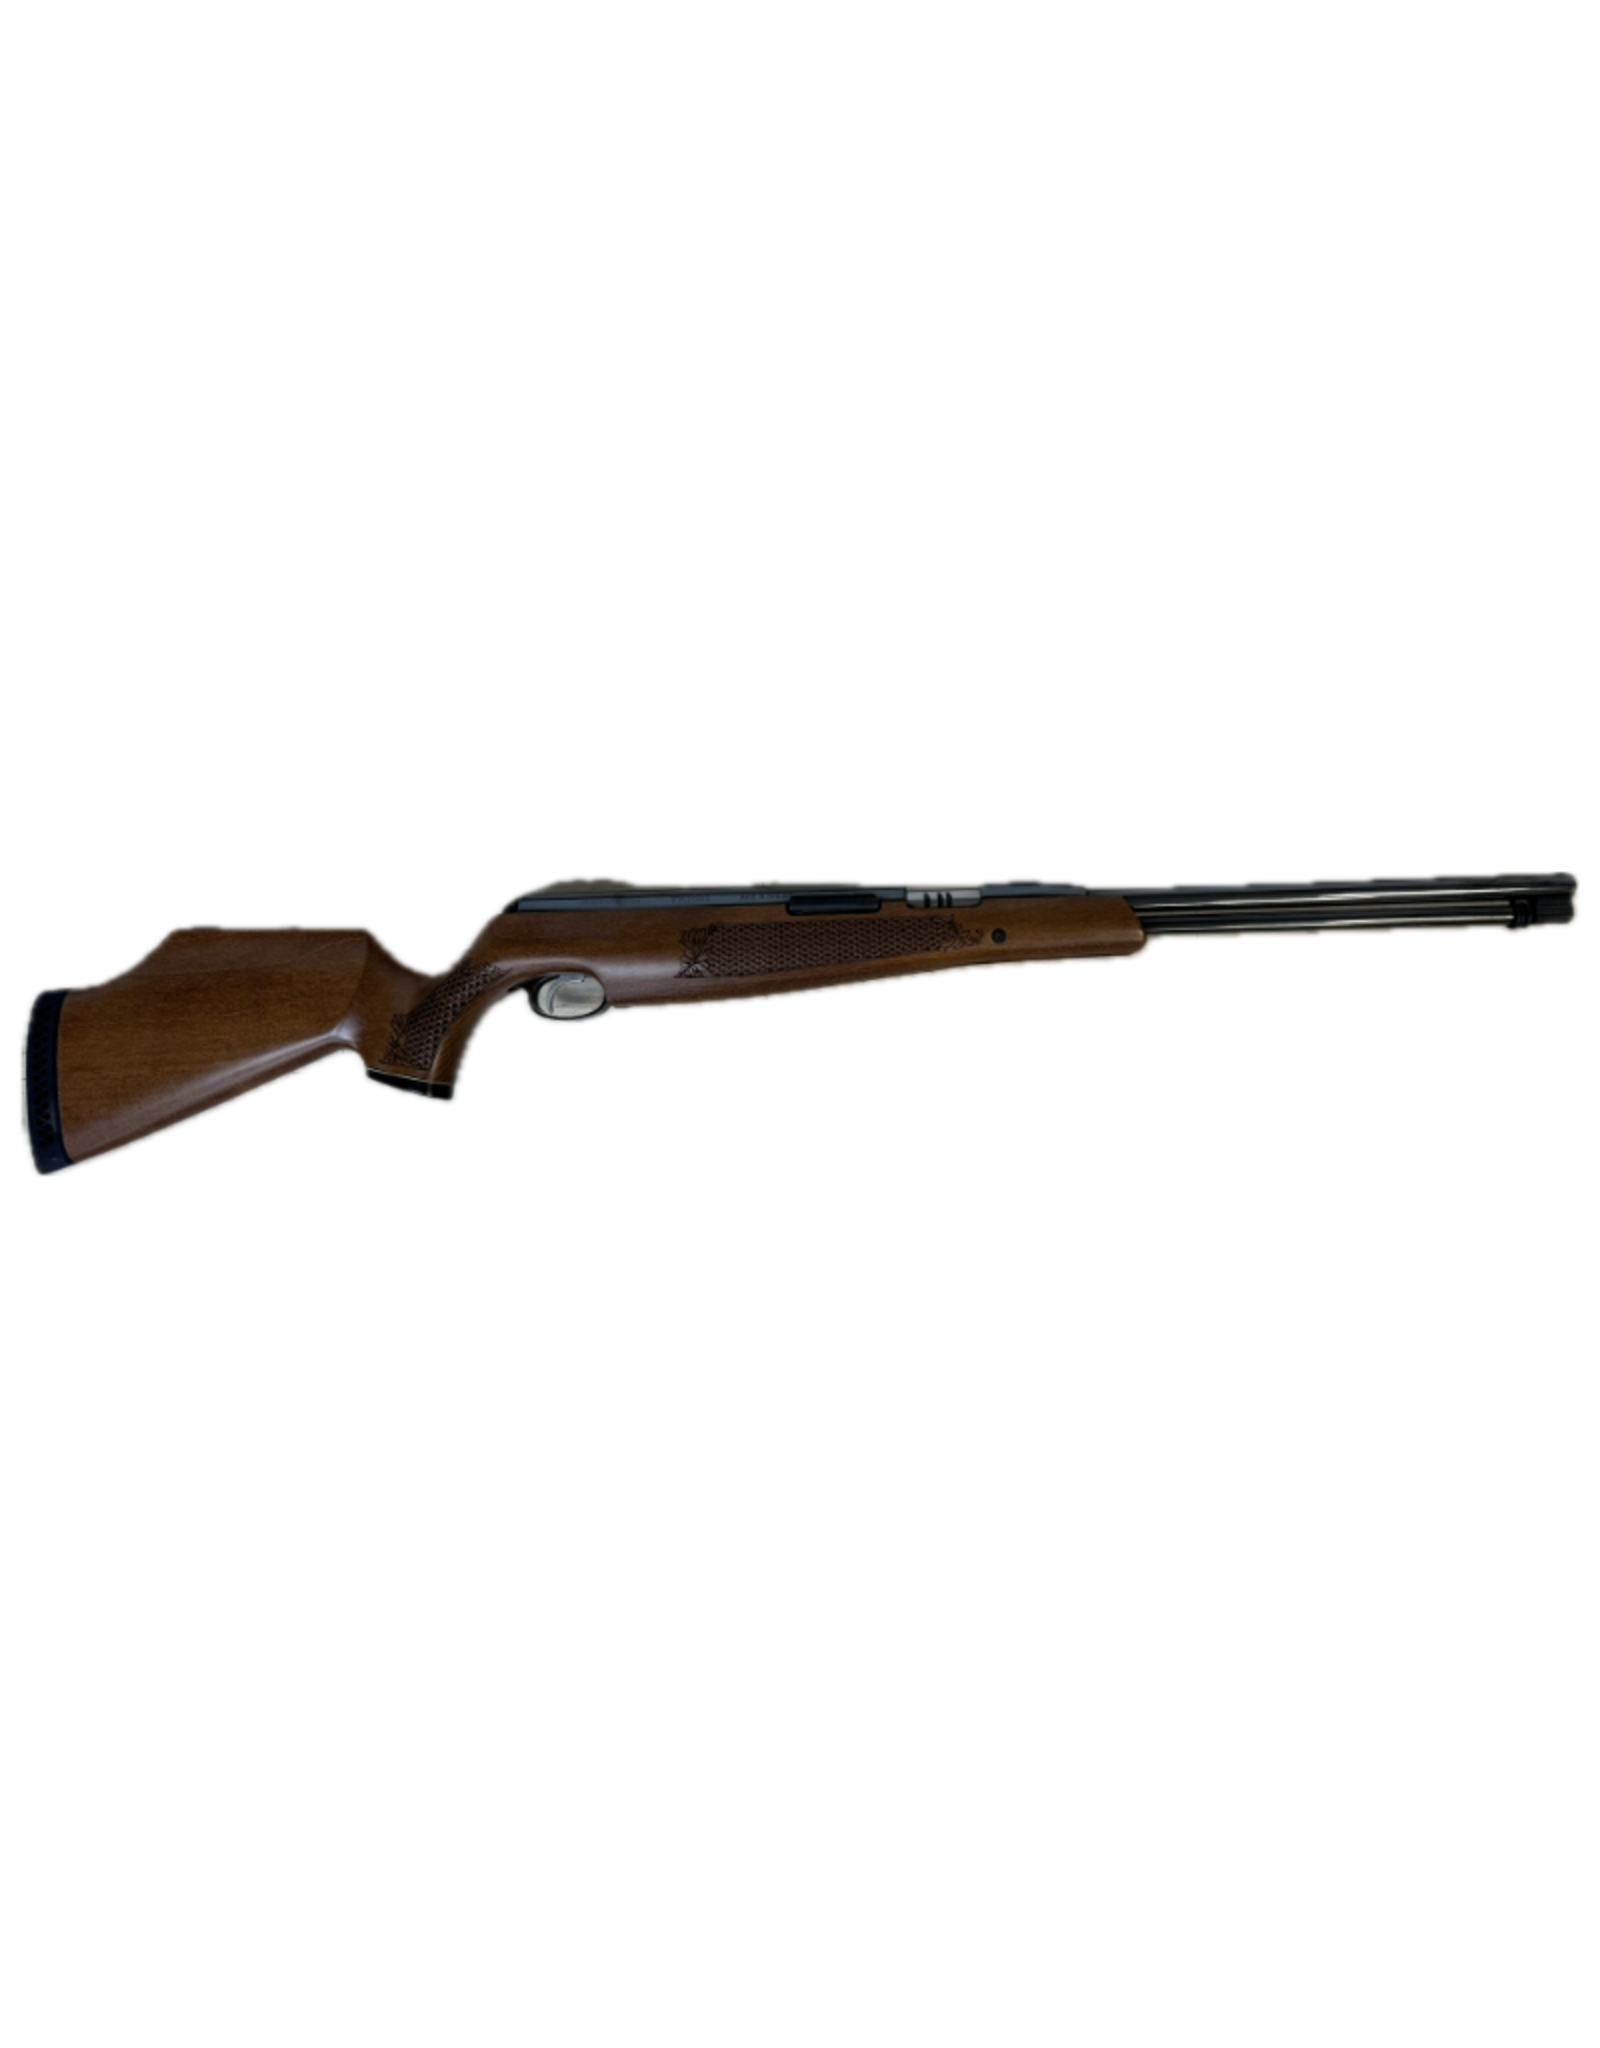 *PRE-OWNED* Air Arms TX200 MKIII .177